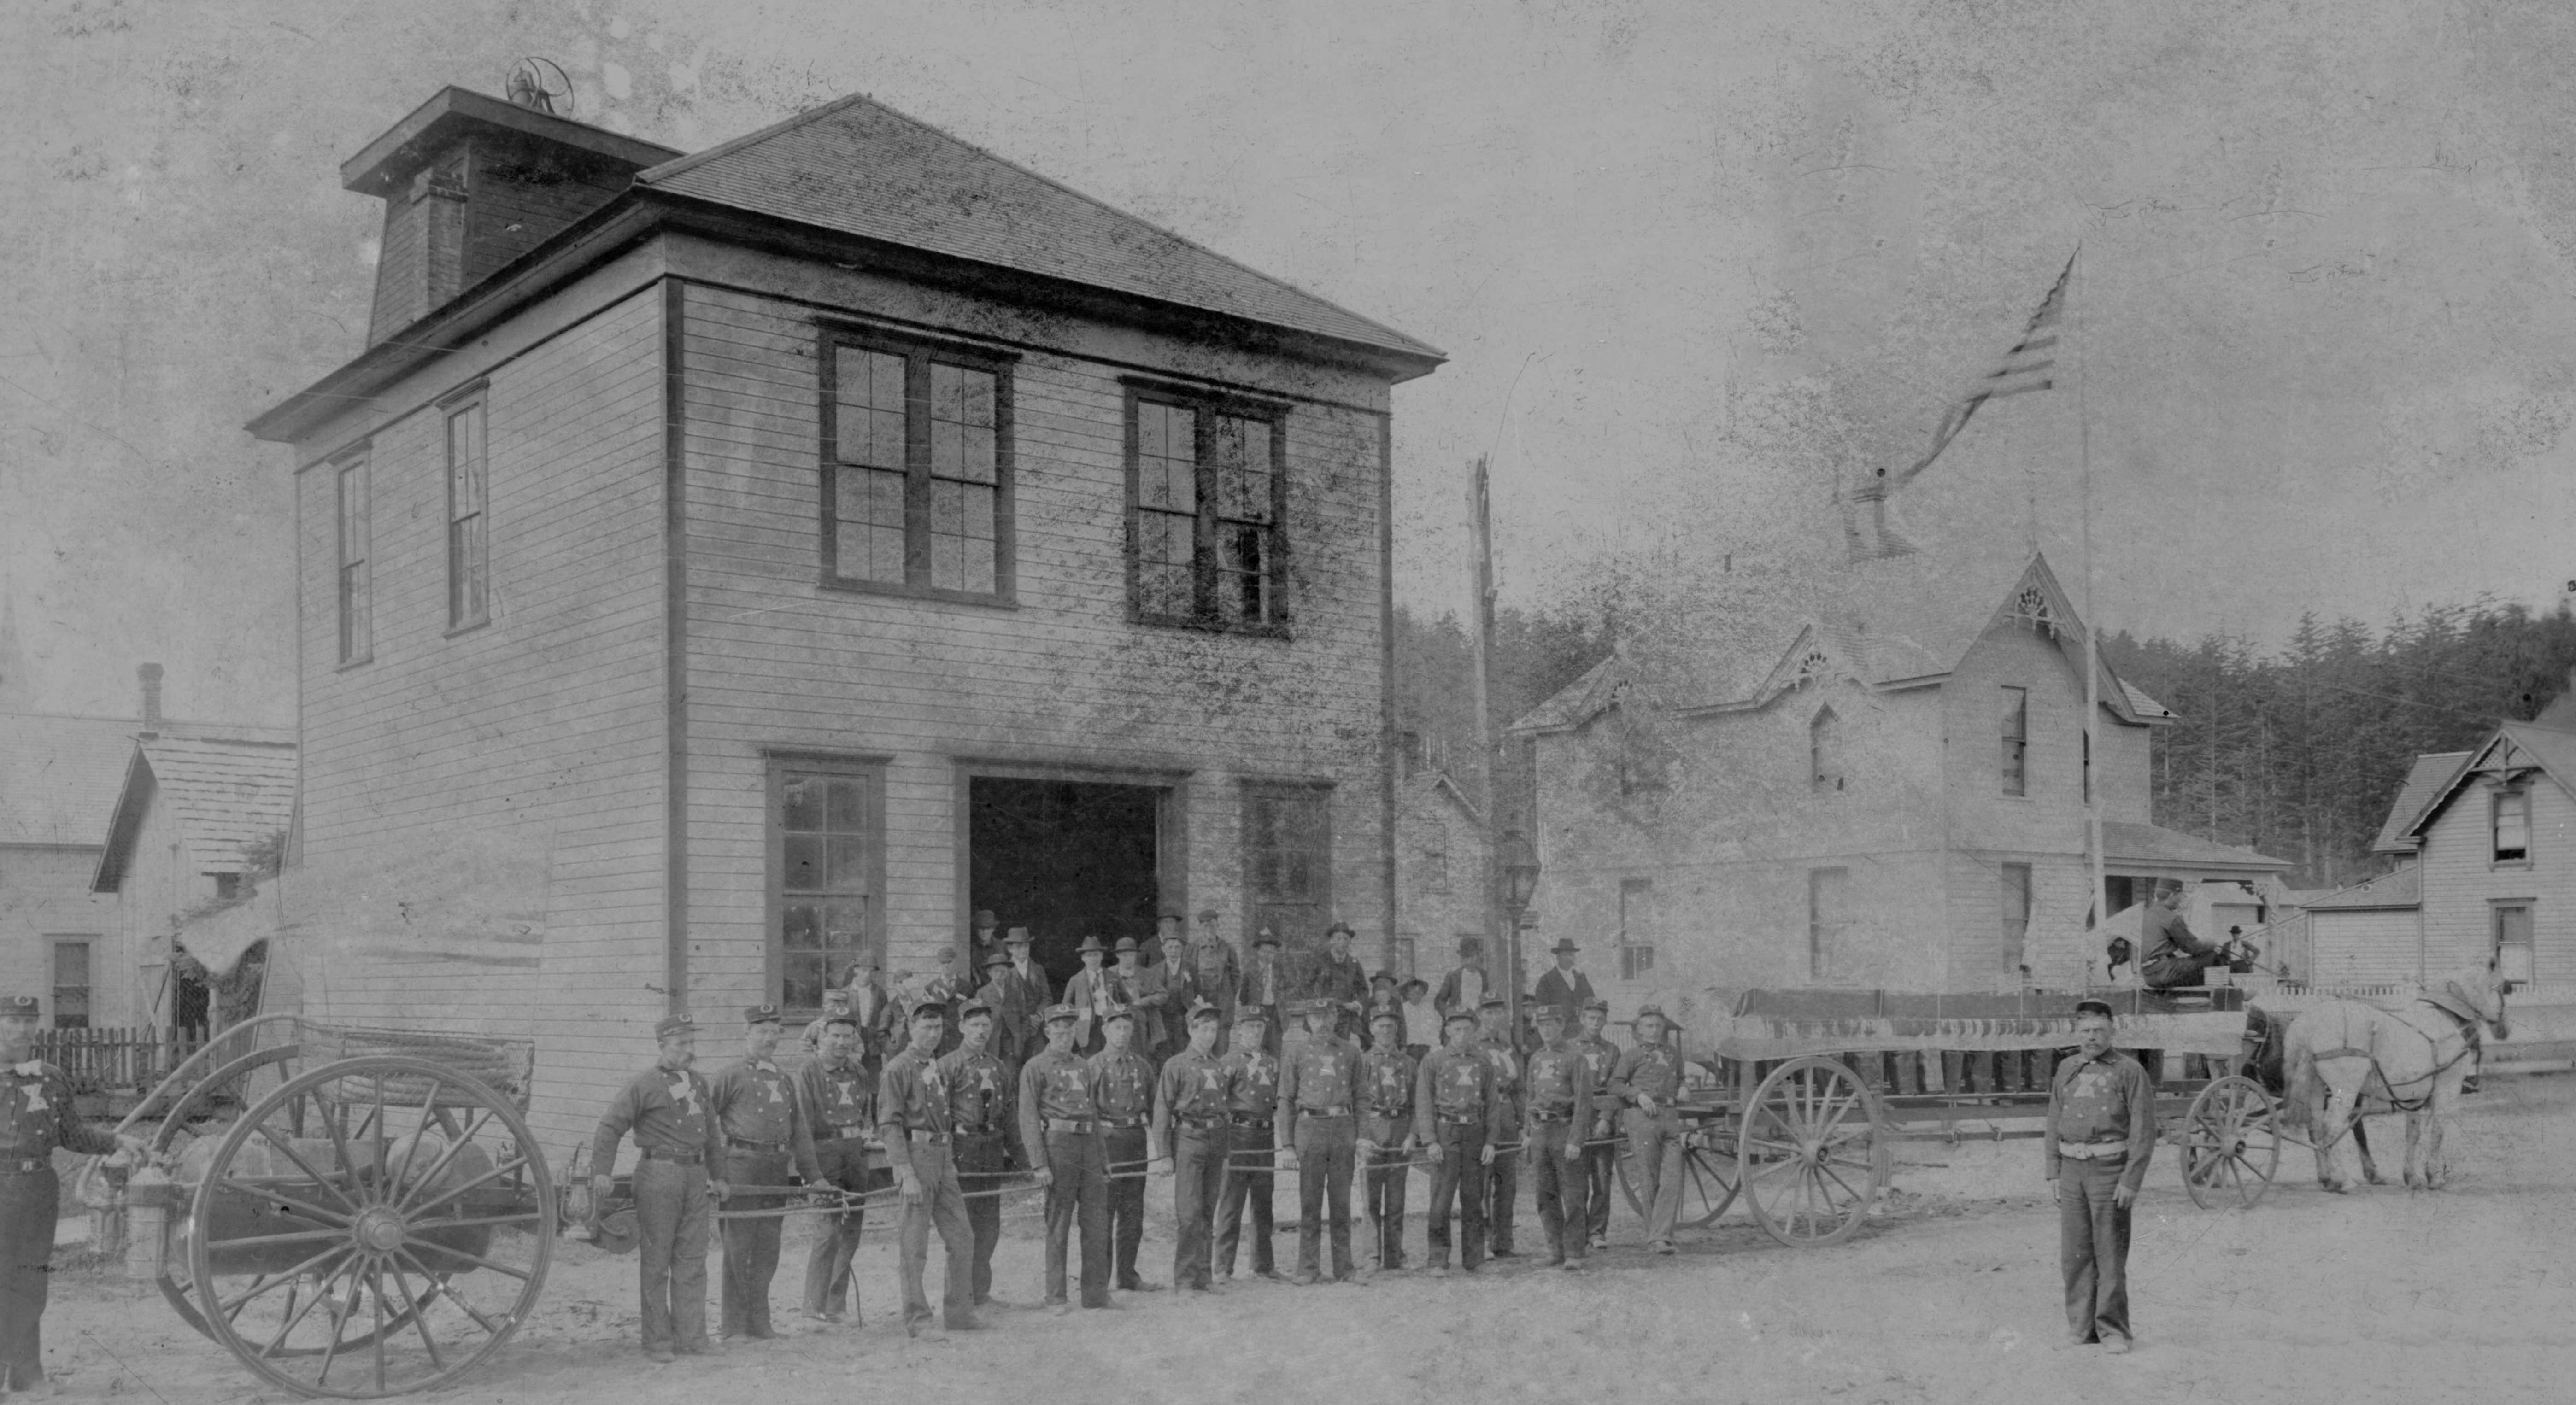 Ilwaco Hook and Ladder Company Organized in 1887 - Clio